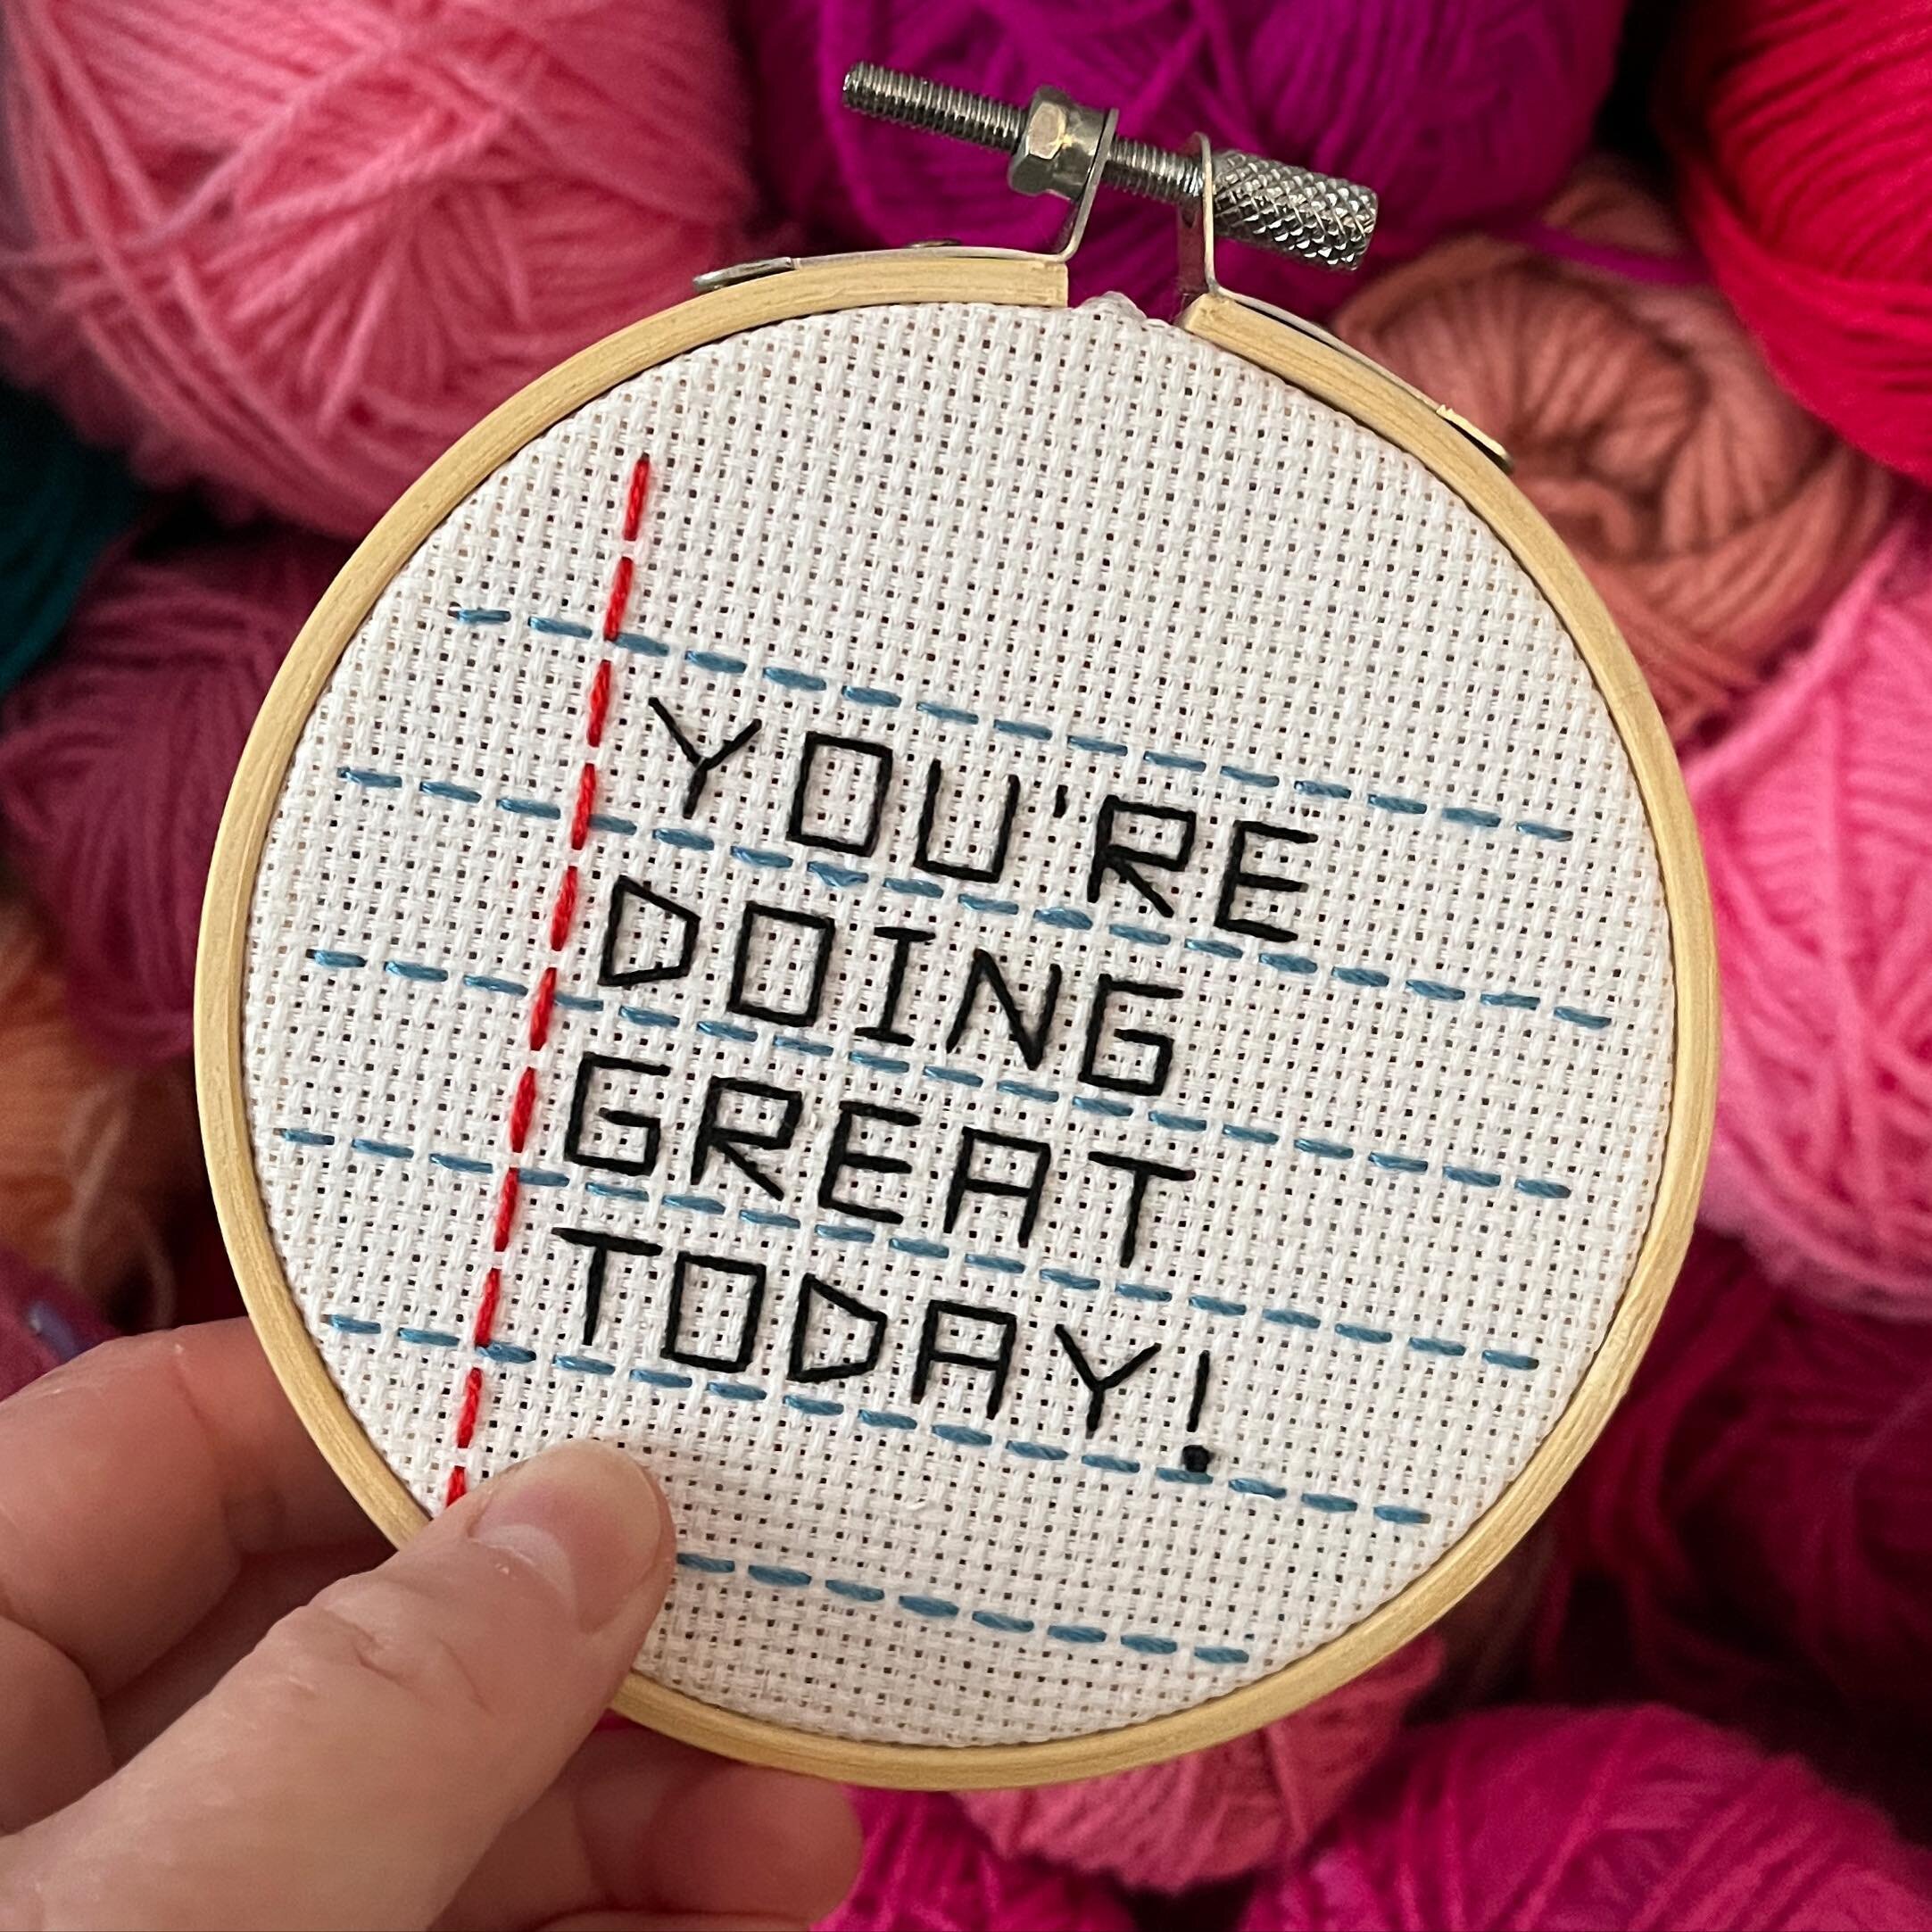 You&rsquo;re doing great!! Keep going! ❤️🥰 
.
#embroidery #embroiderersofinstagram #embroider #positivevibes #positivethinking #crossstitch #positive